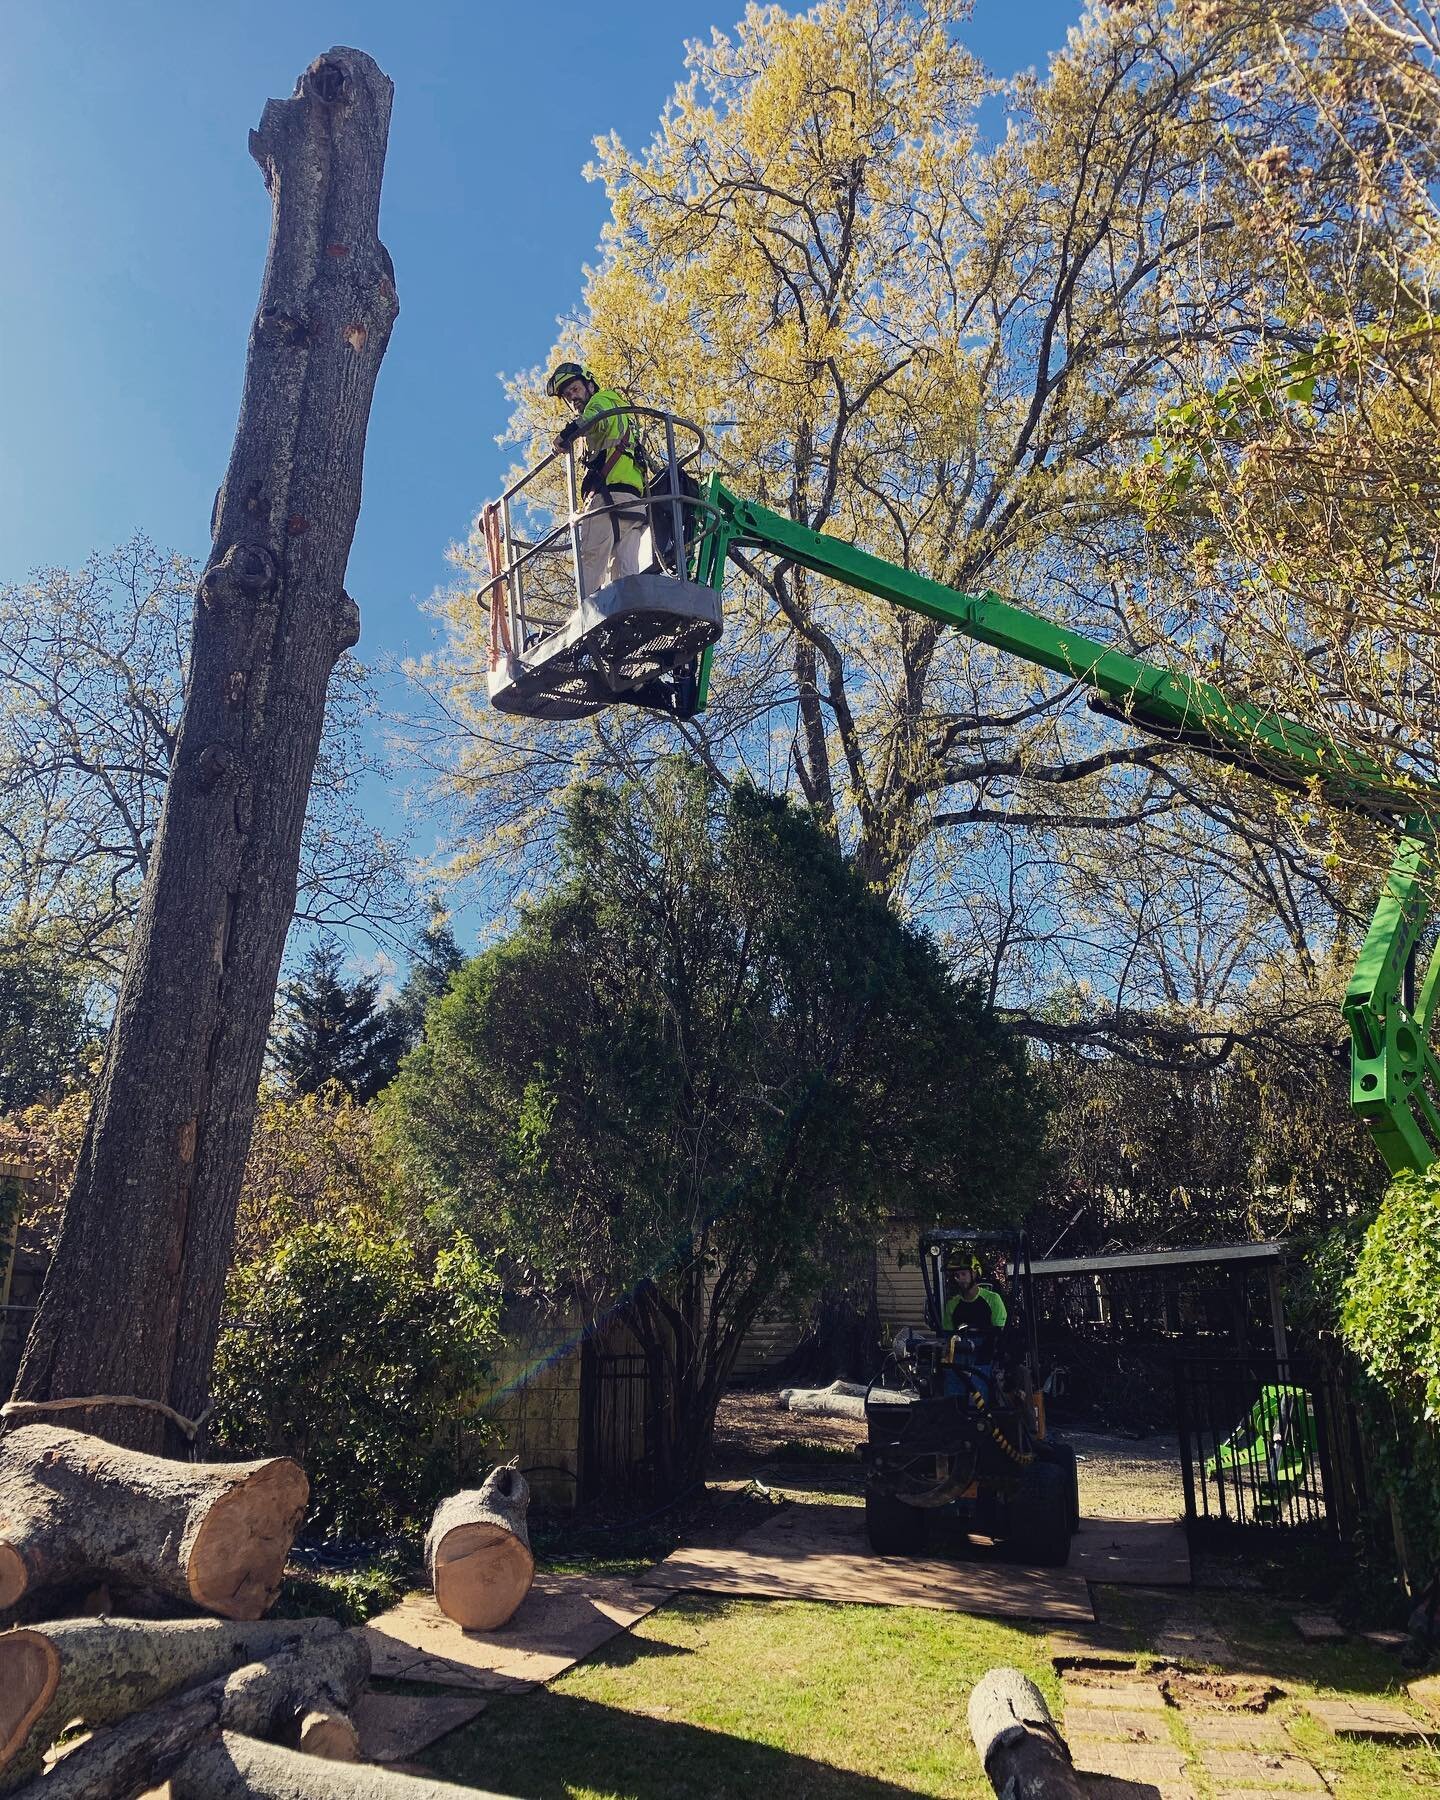 Getting it done in the tightest spaces 🌳🍃💪🏼😎 #getit #treeguys #mostreferred #athensga #treepros